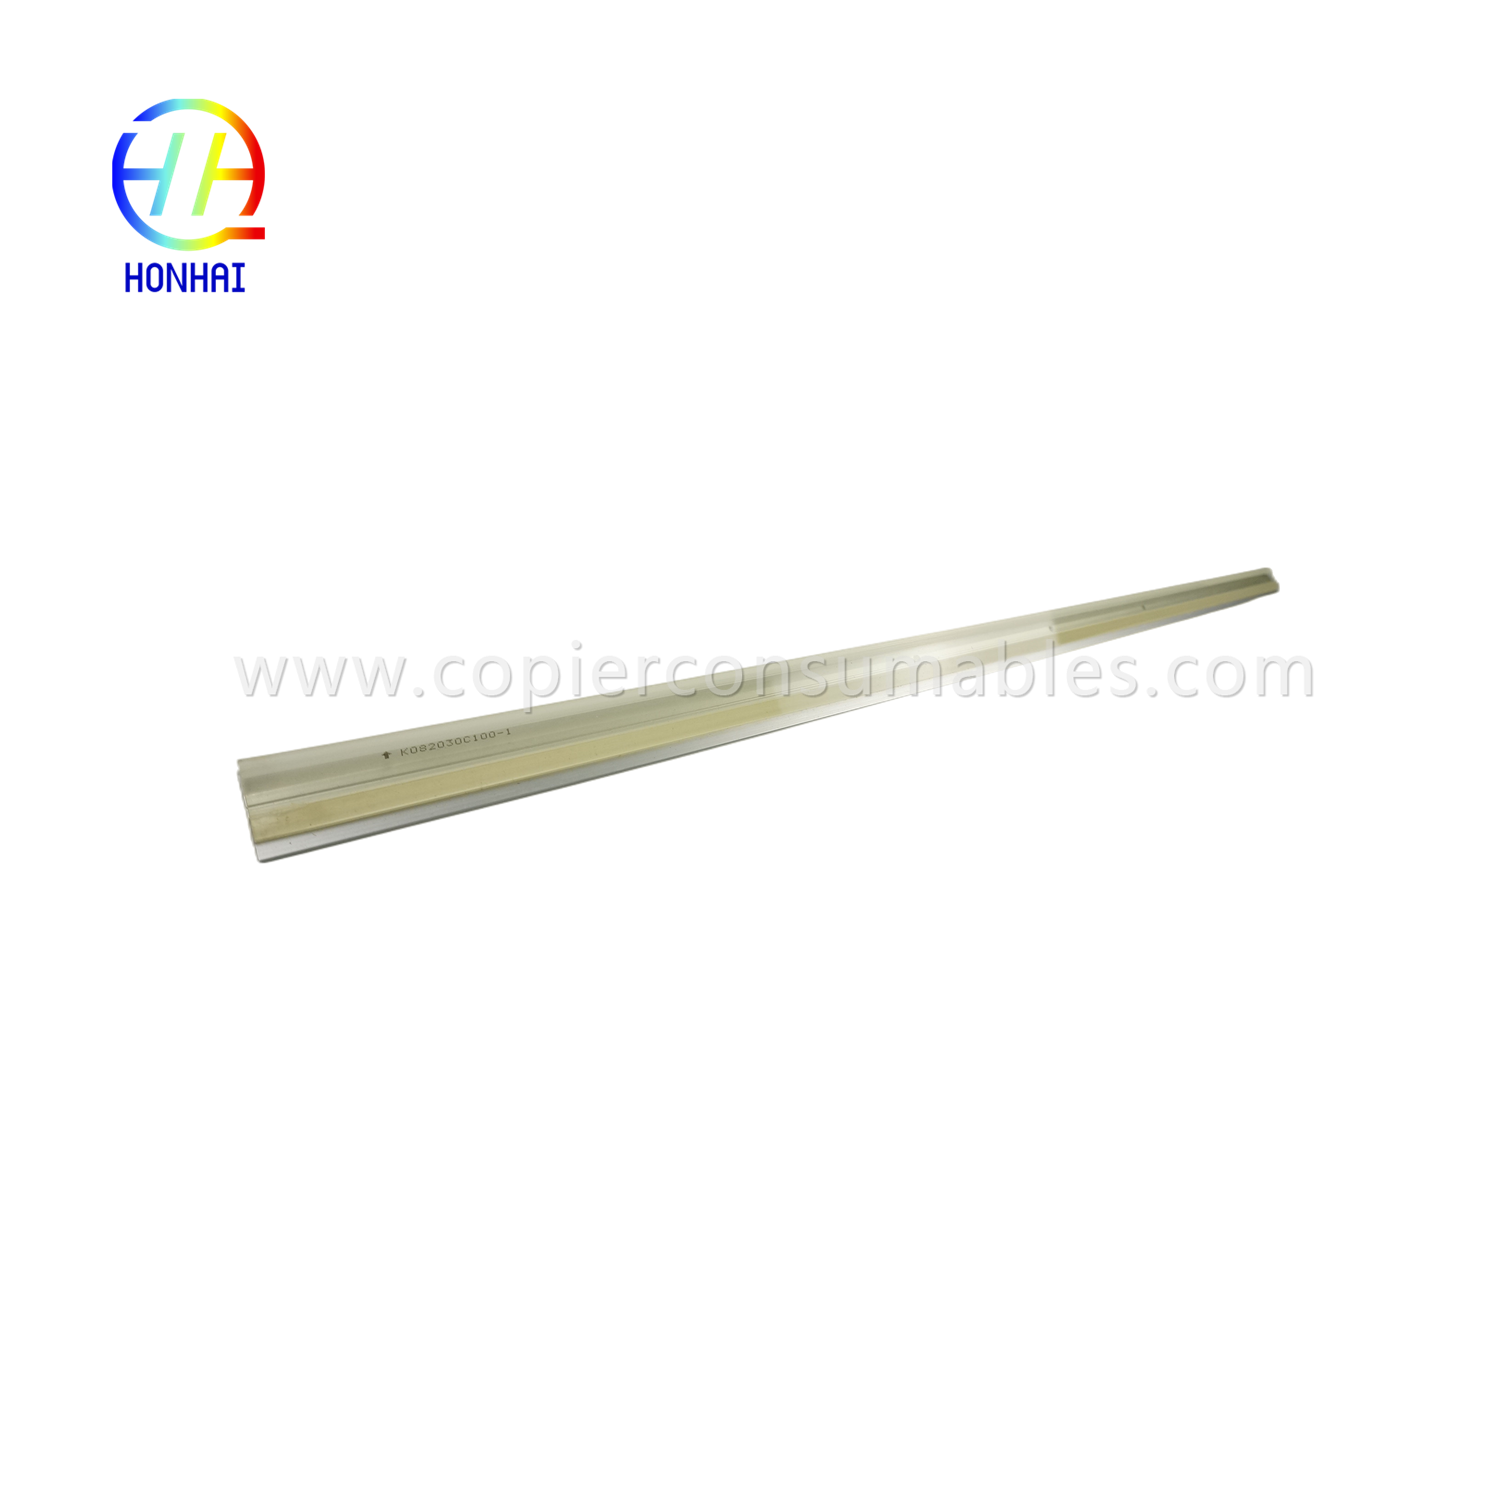 Cleaning Blade for Oce 9300 9400 9600 TDS300 400 600 700 Pw300 340 360 365 (PN. 2912651) (2)